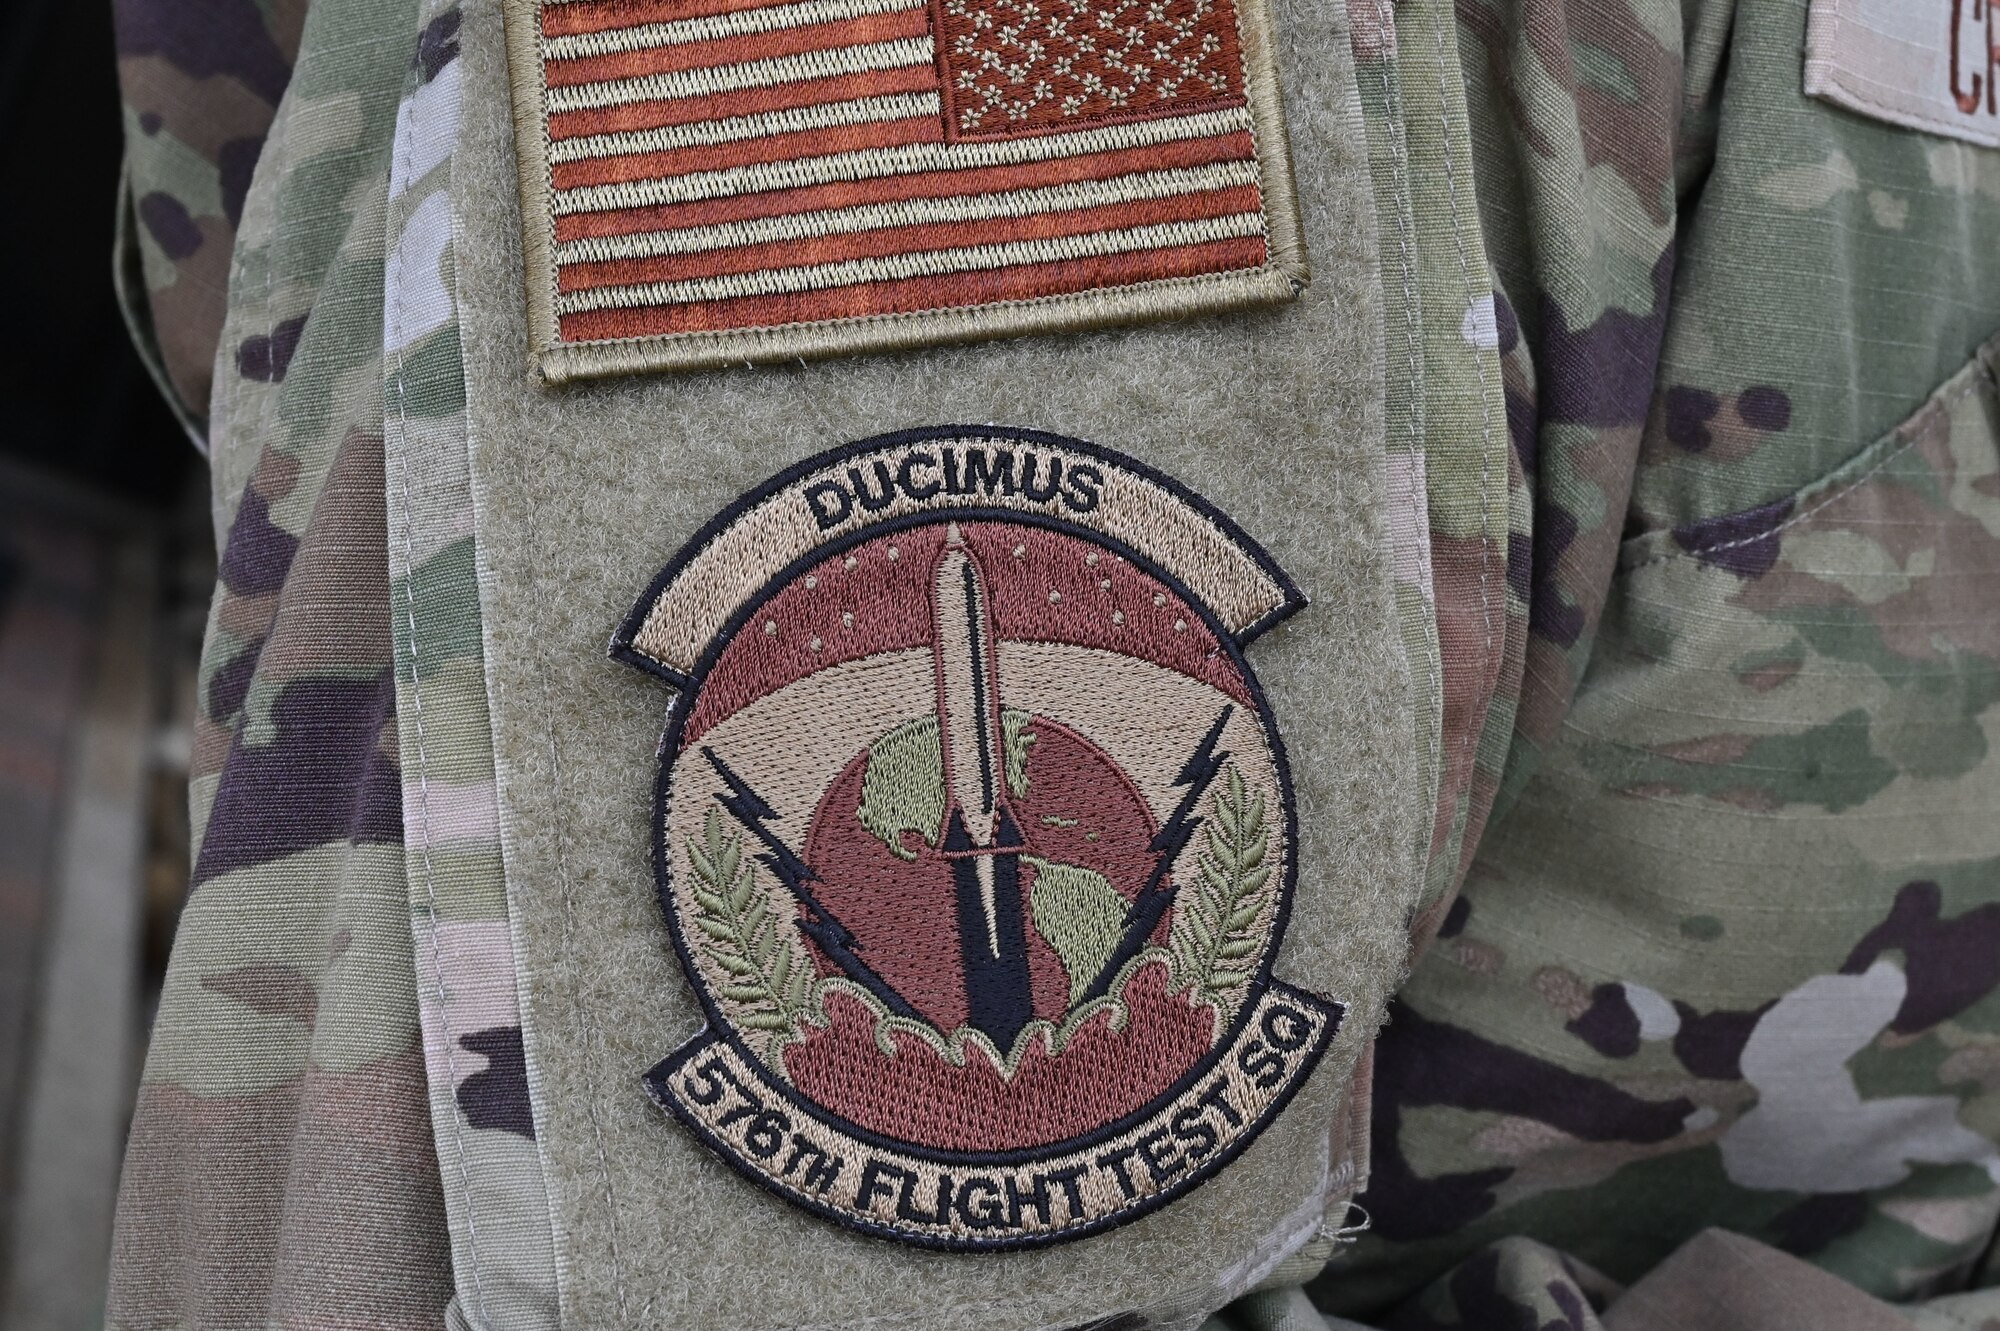 A patch is displayed on the arm of a uniform.